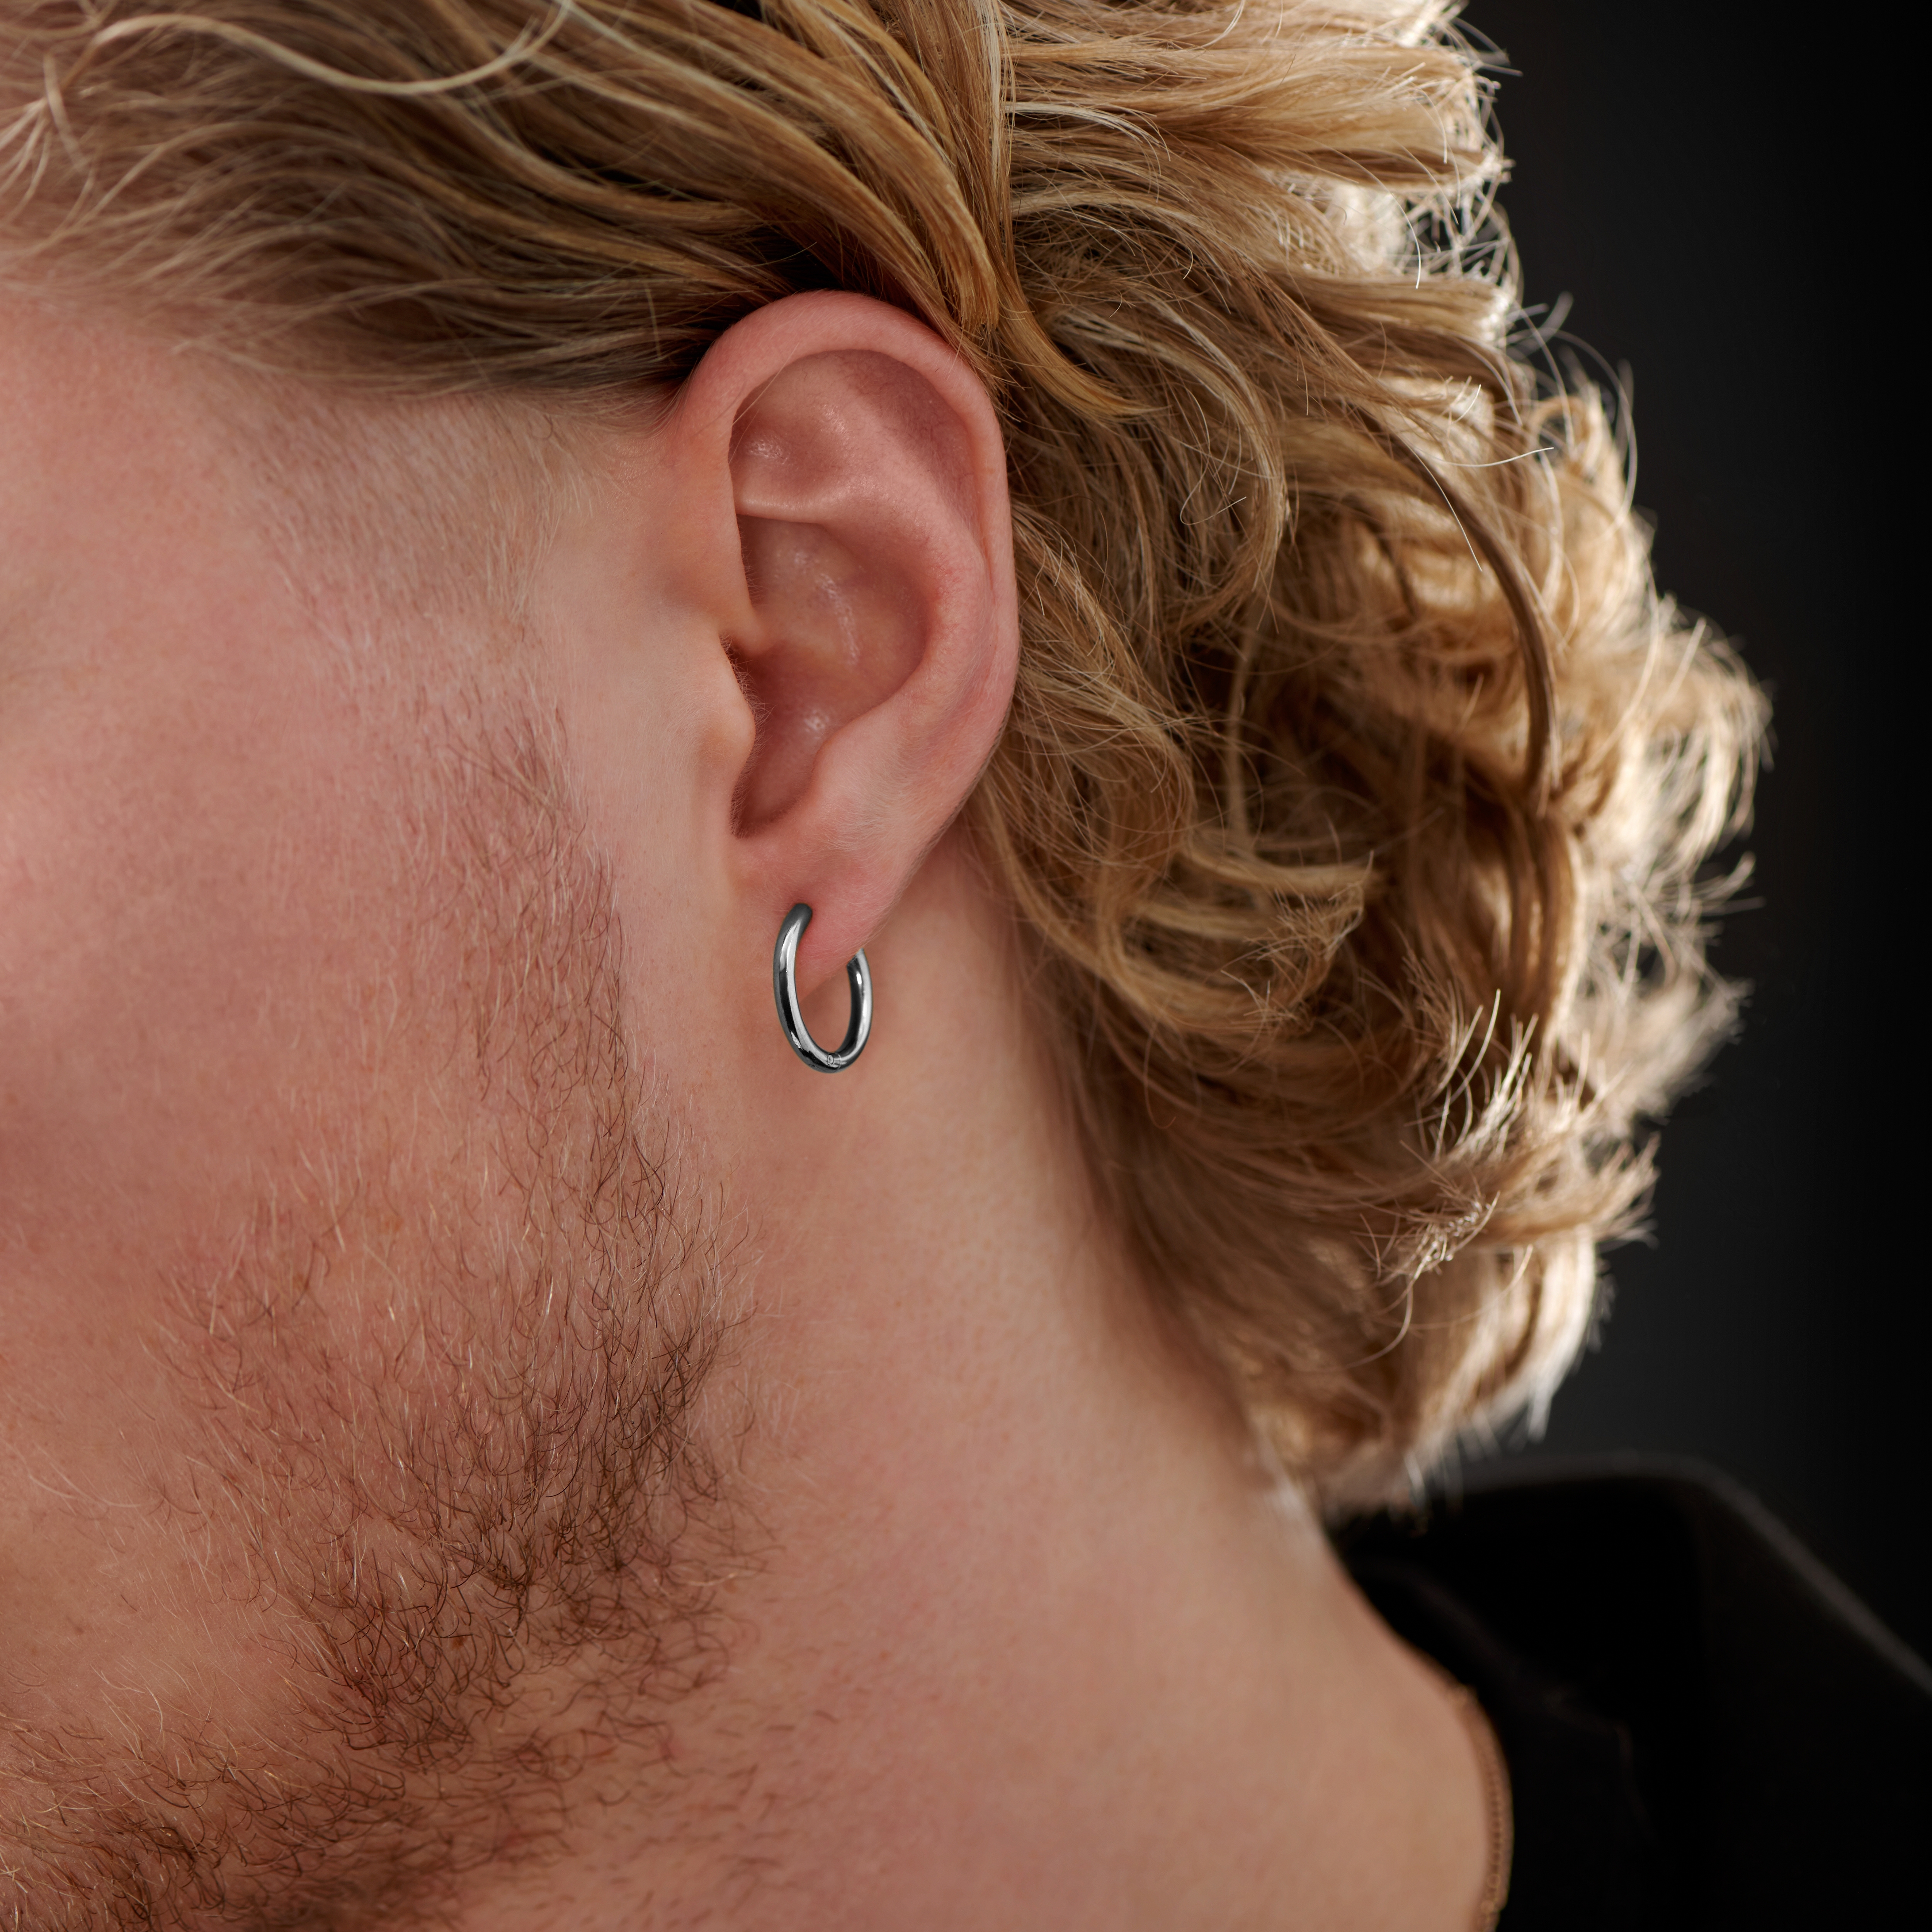 Hring | Handcrafted stud earrings for men from ancient bog oak